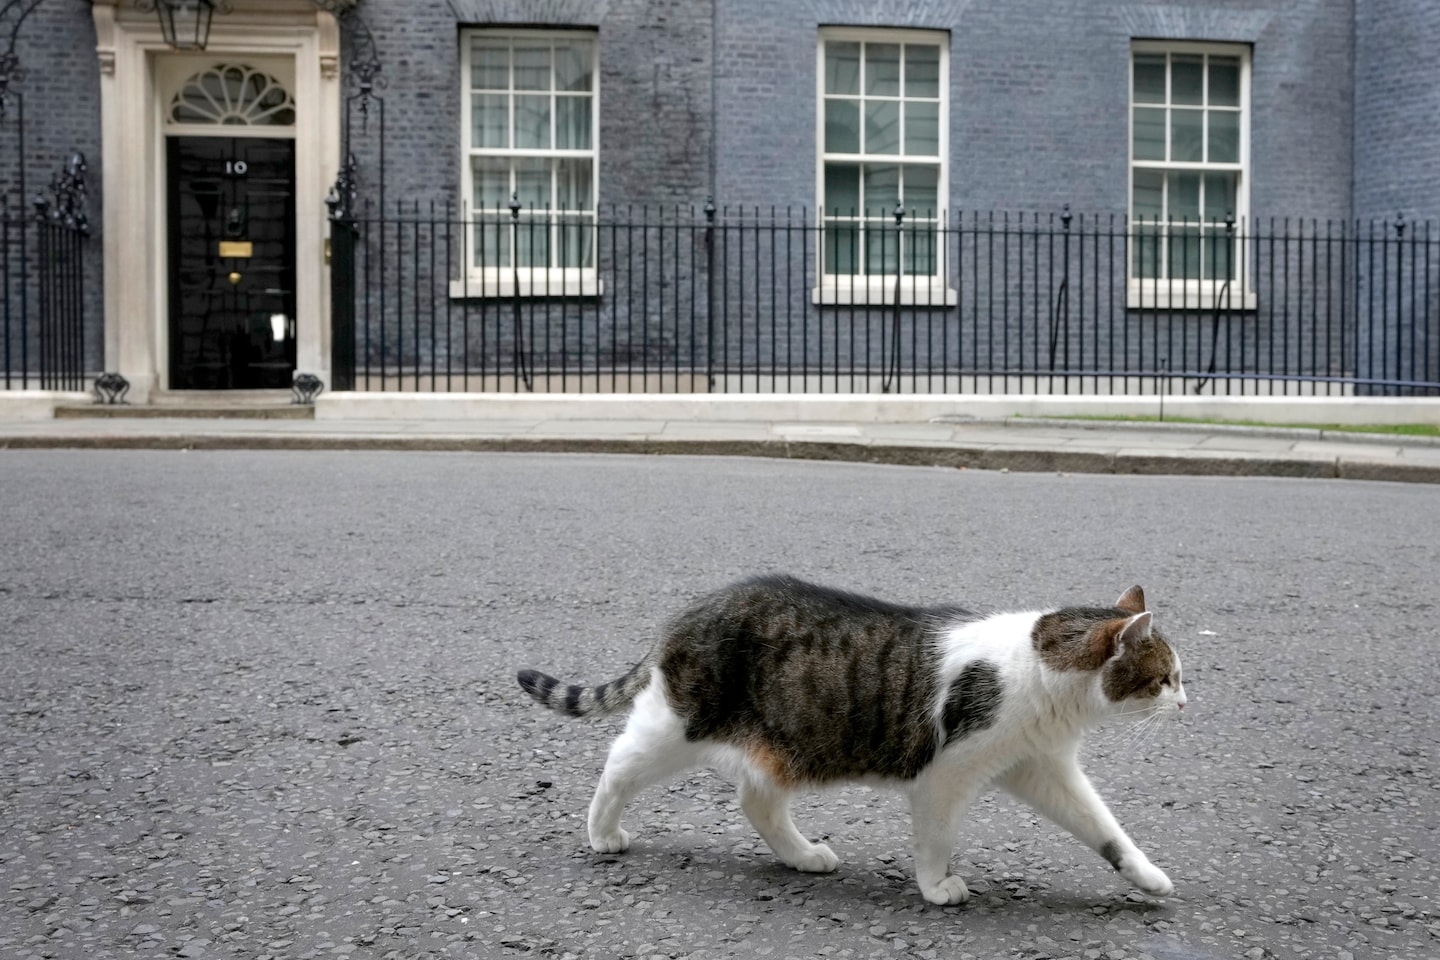 Larry the cat drives off fox in Downing Street animal drama